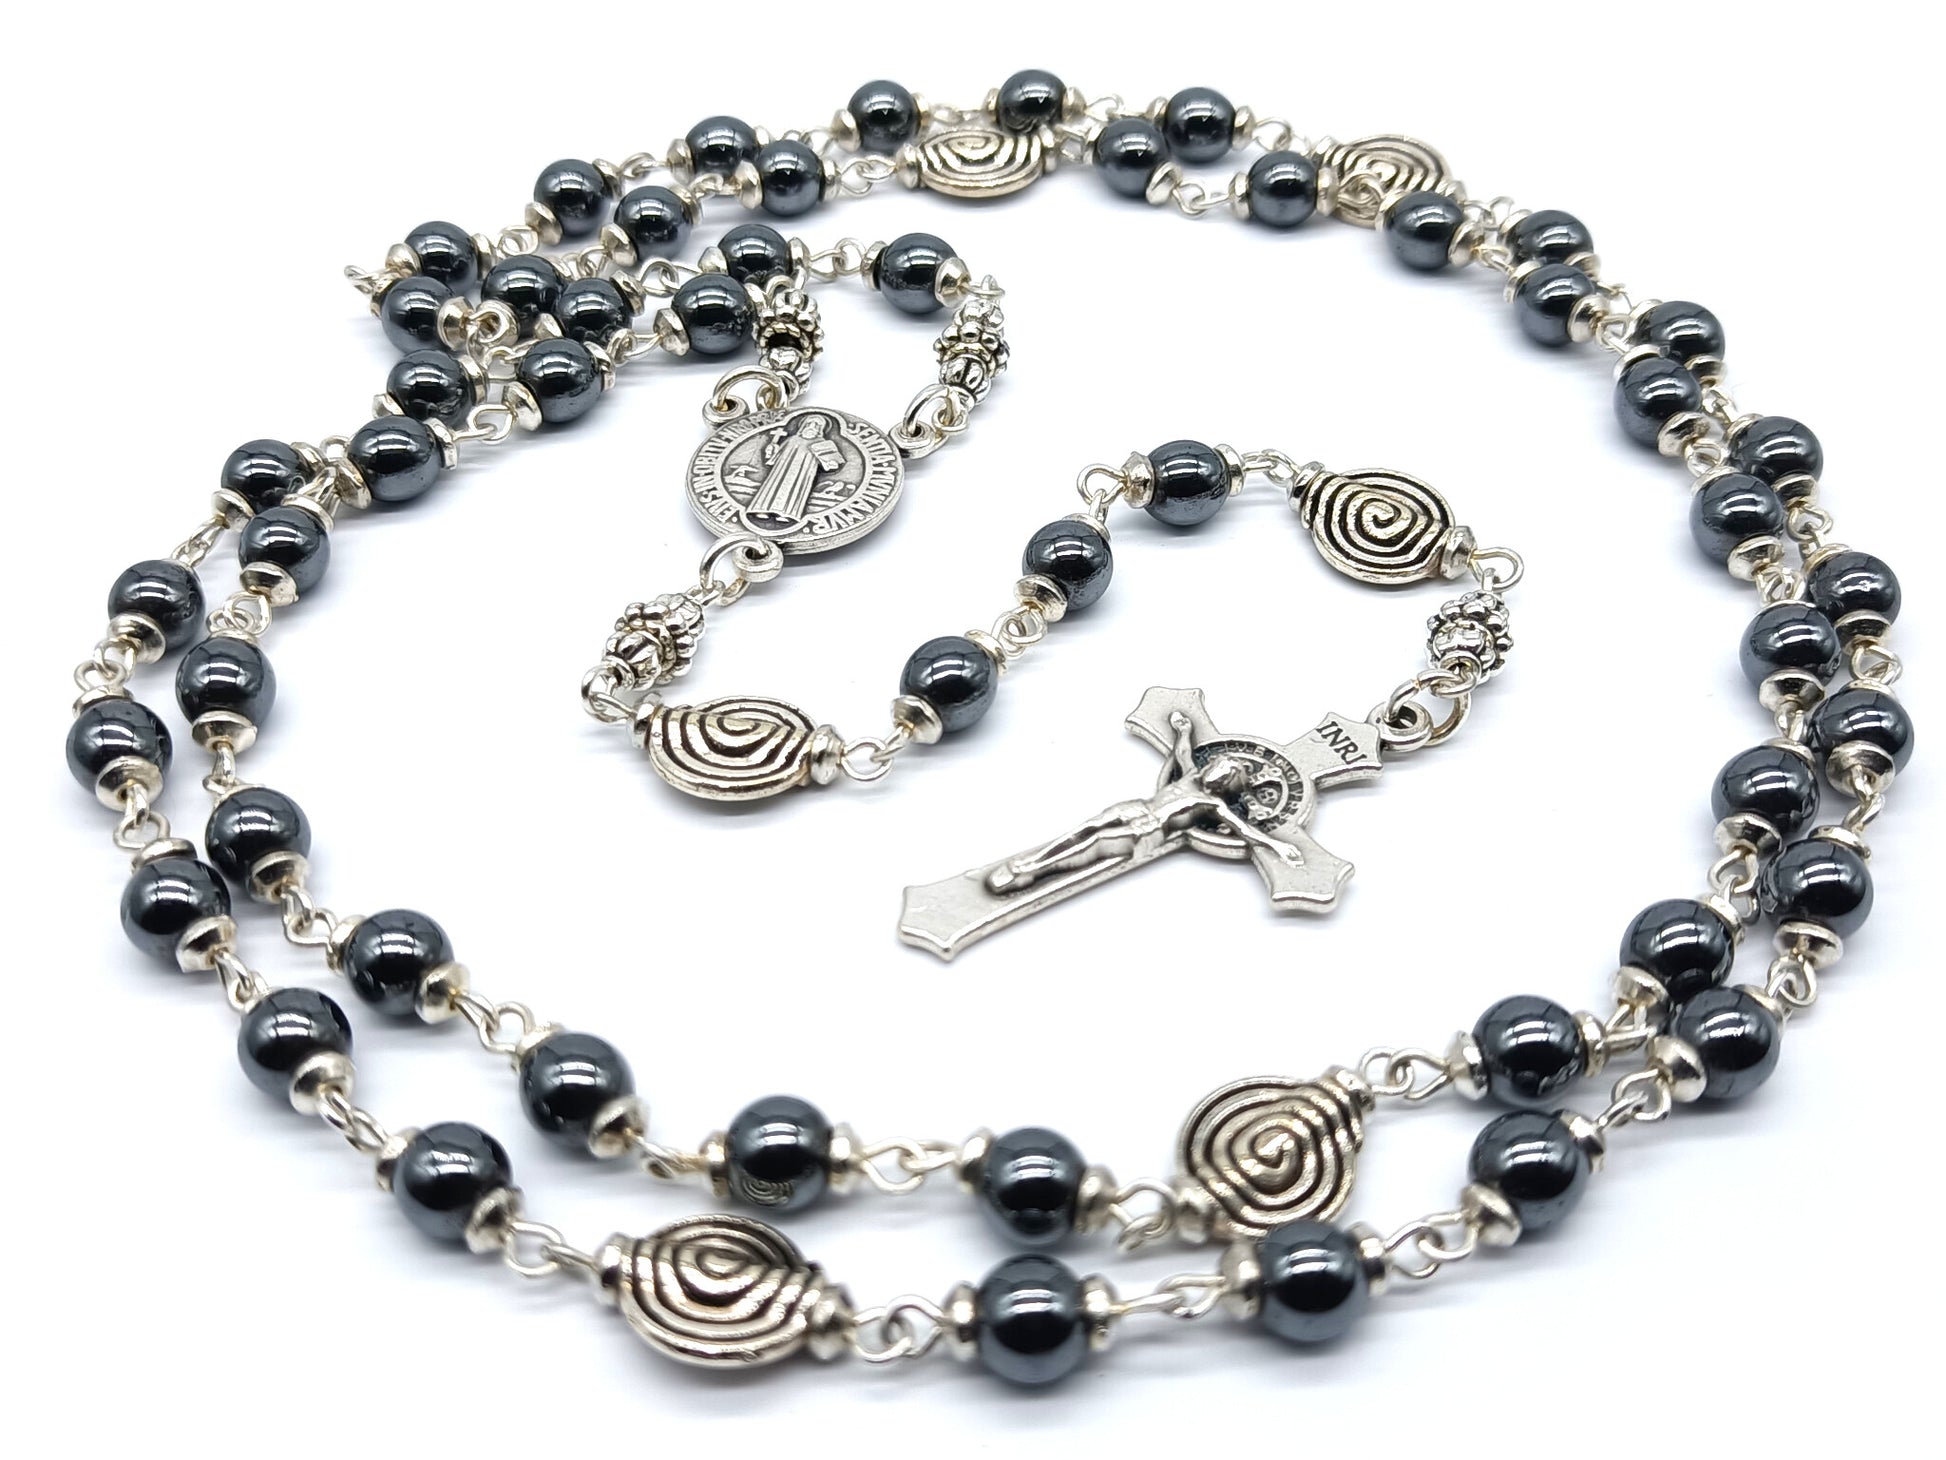 Saint Benedict unique rosary beads with hematite beads, silver St. Benedict crucifix, pater beads and centre medals.